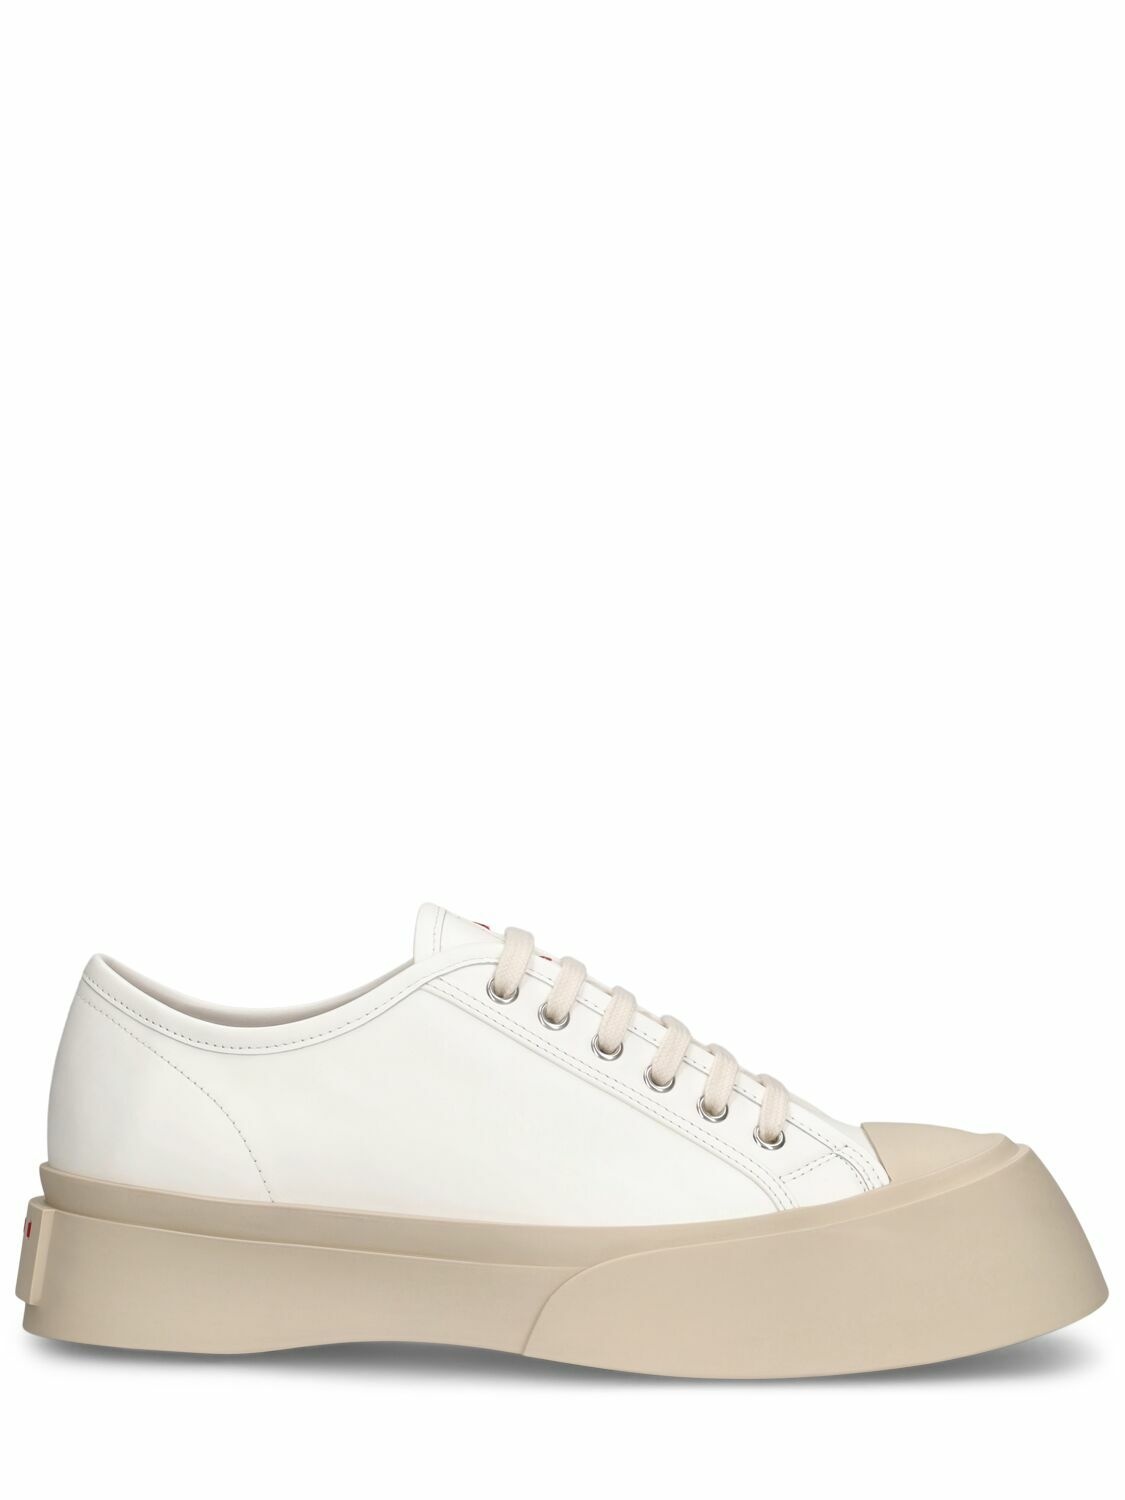 Photo: MARNI - Pablo Leather Low Top Sneakers